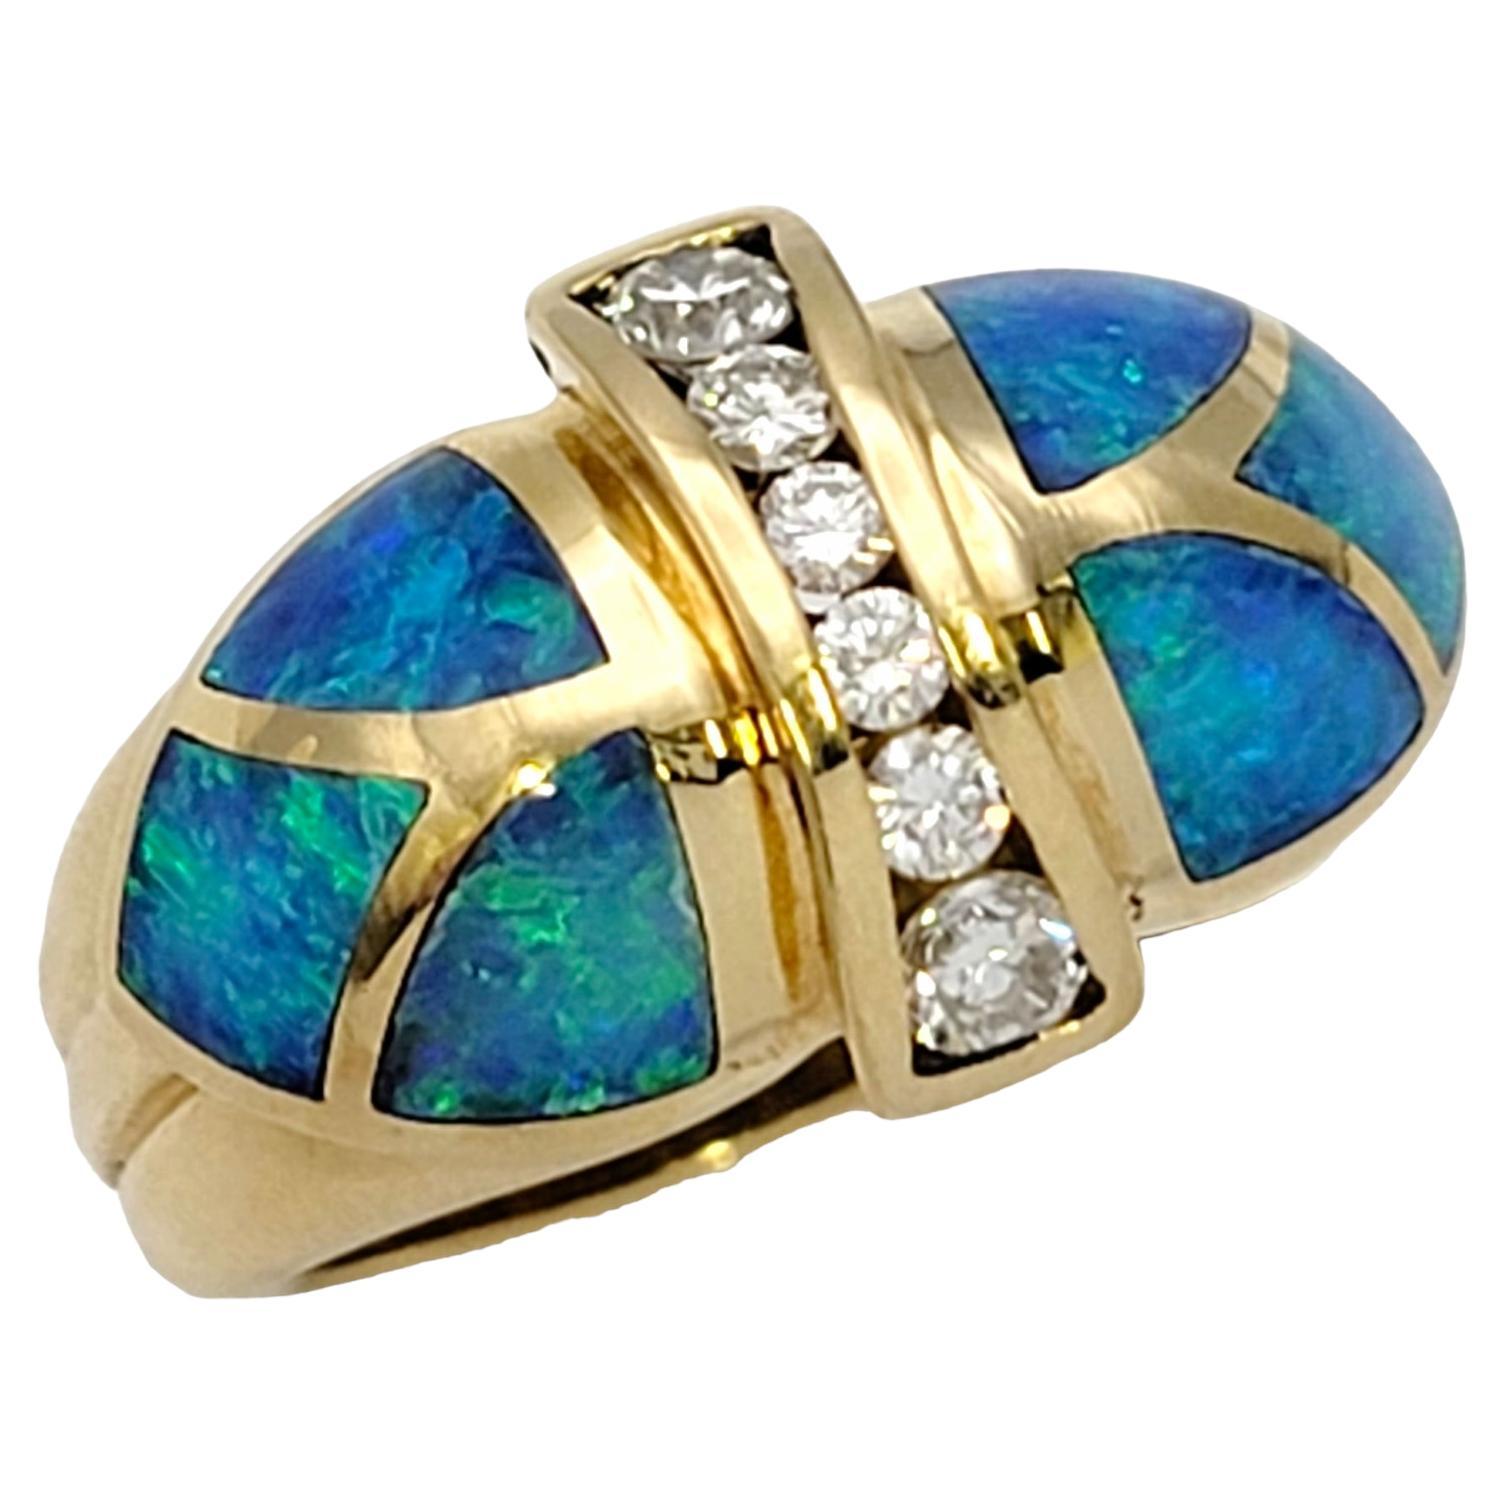 Diamond and Black Opal Inlay Domed Band Ring in 18 Karat Yellow Gold